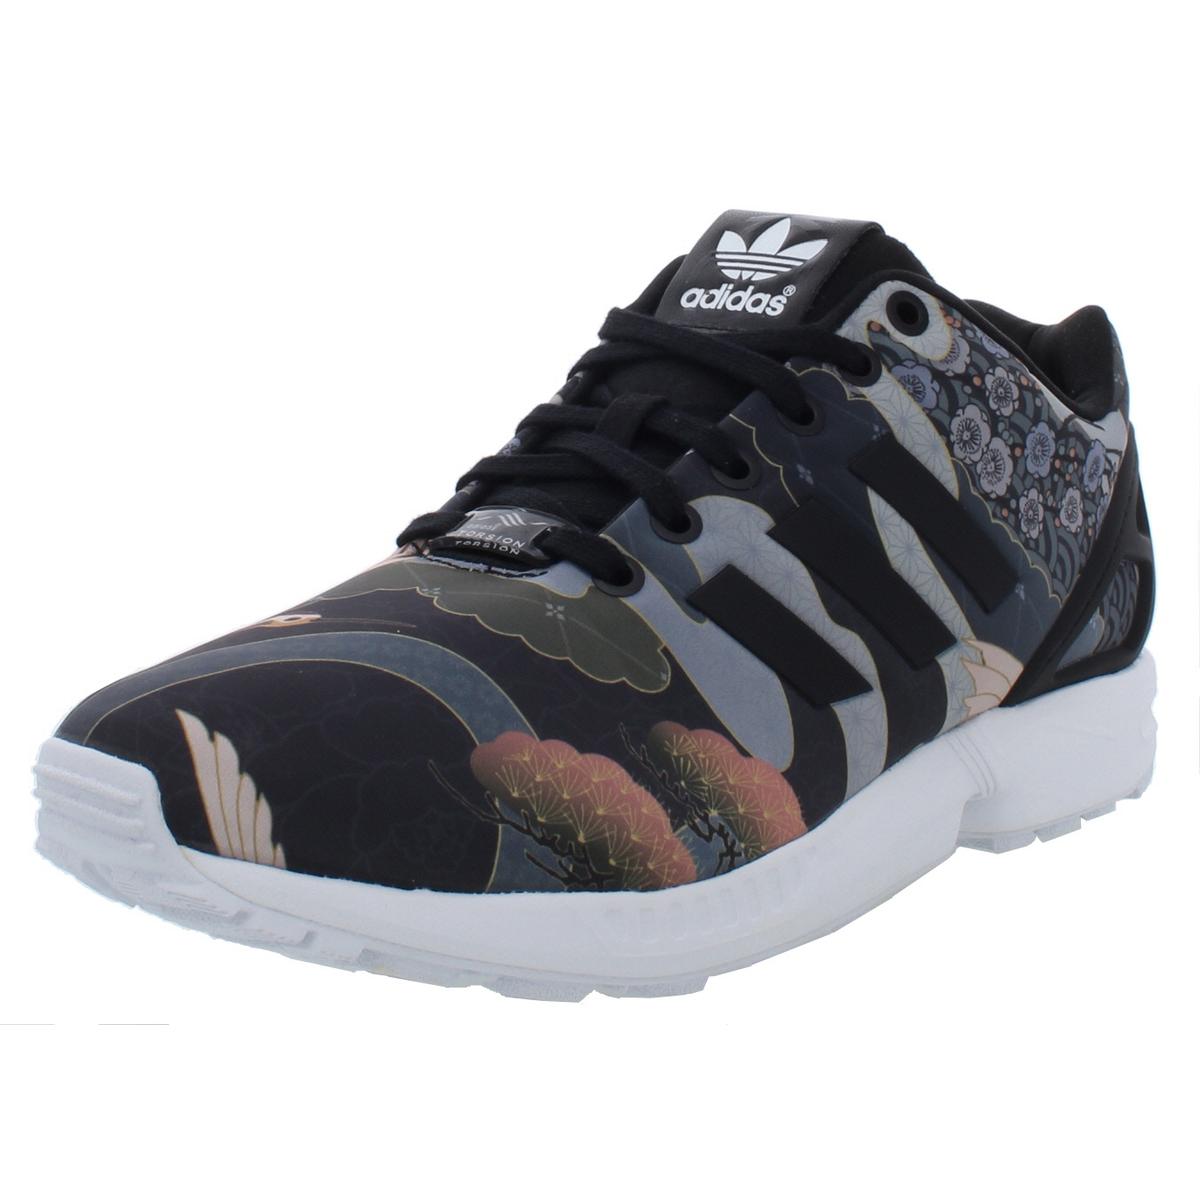 Zx Flux Womens Lightweight Lifestyle Fashion Sneakers